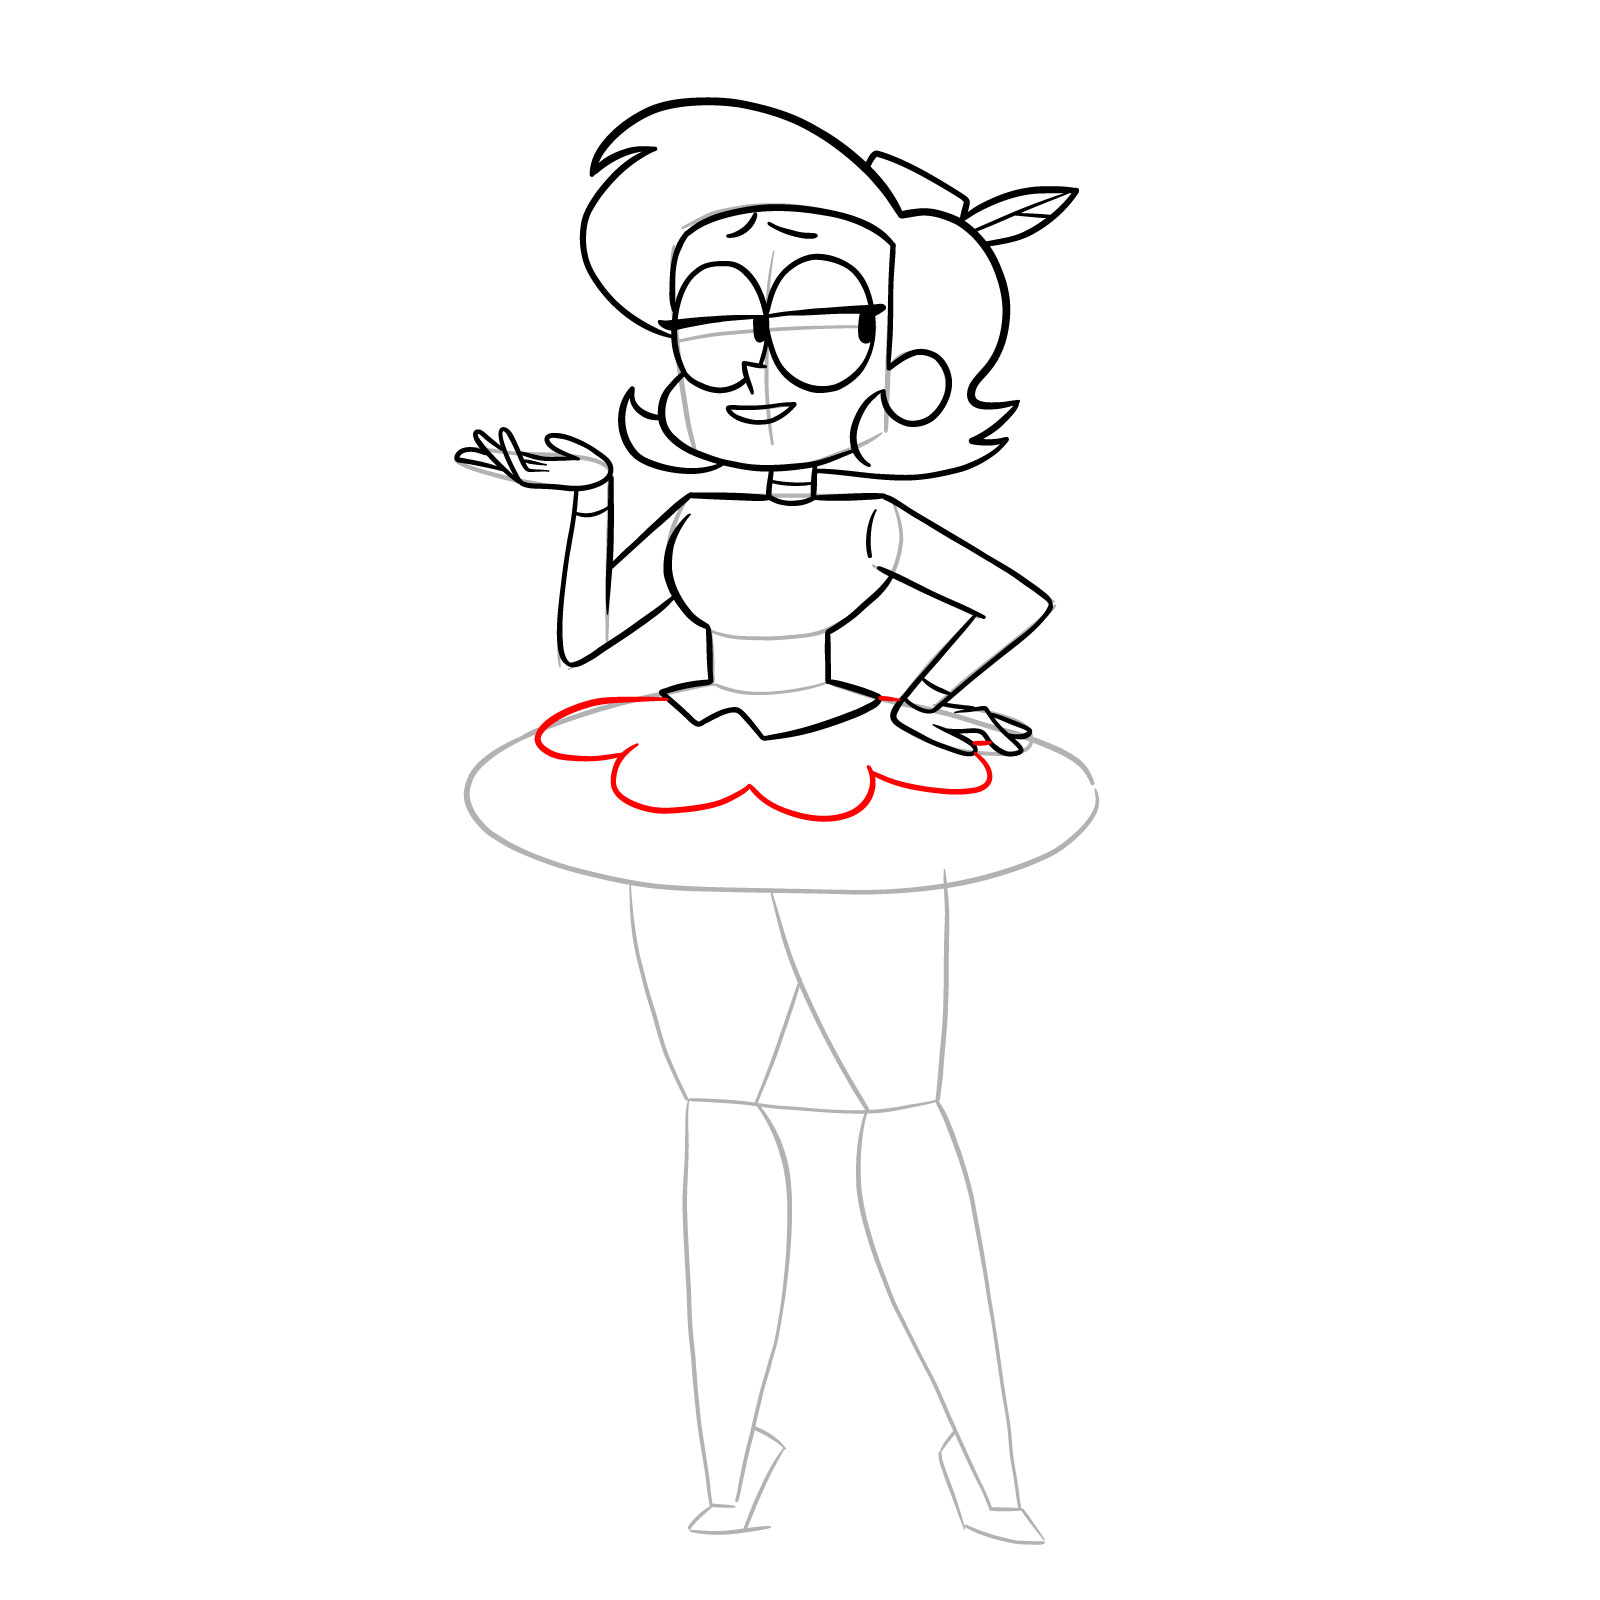 How to draw Elodie from OK K.O.! - step 26